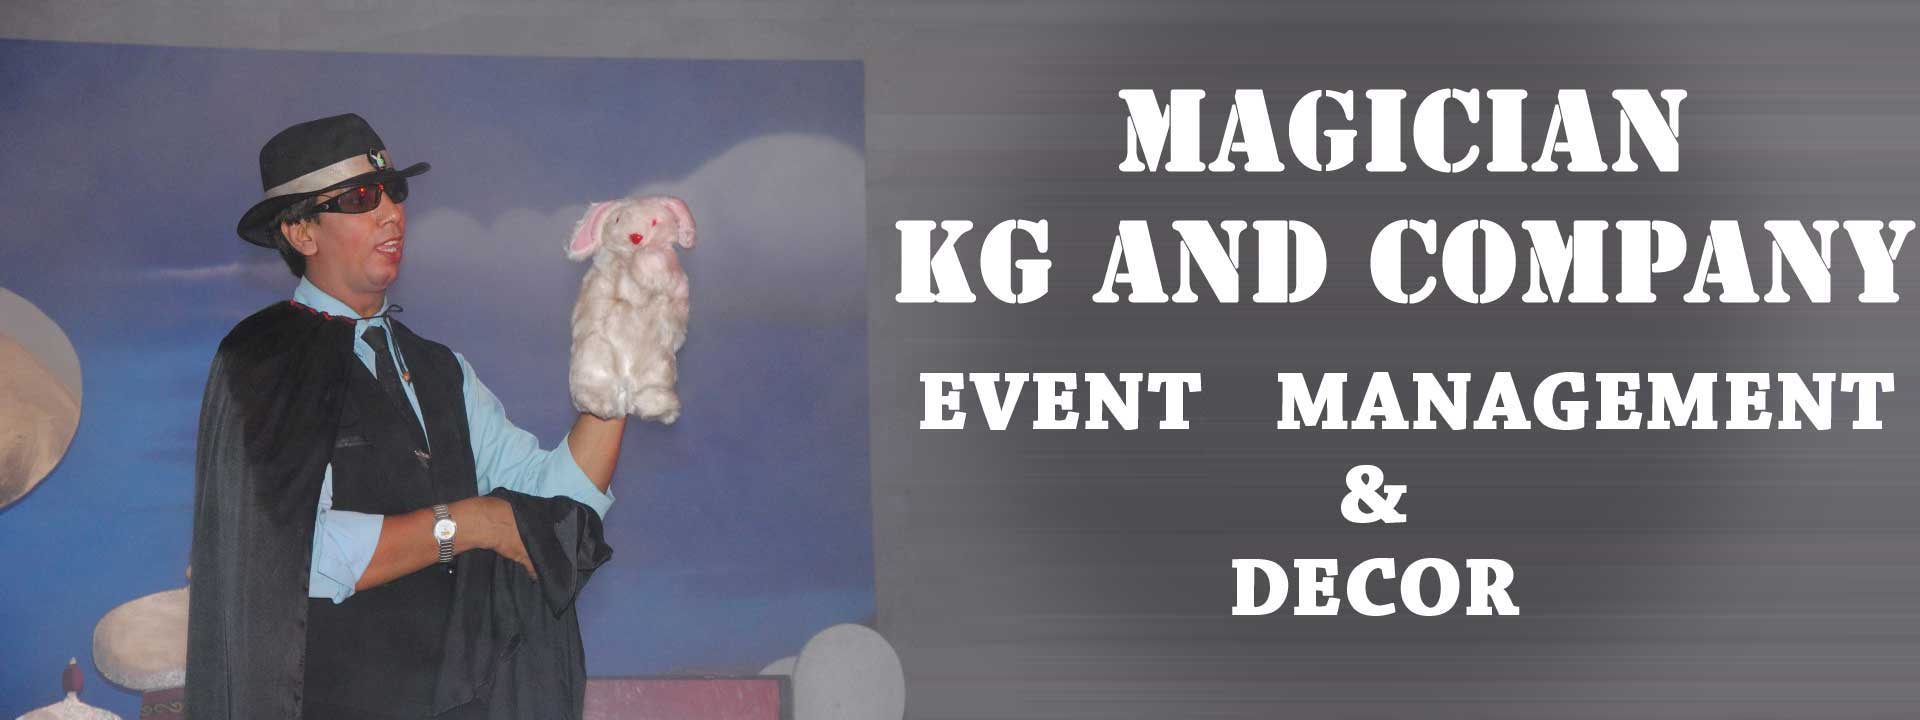 MAGICIAN KG AND COMPANY EVENT MANAGEMENT & DECOR